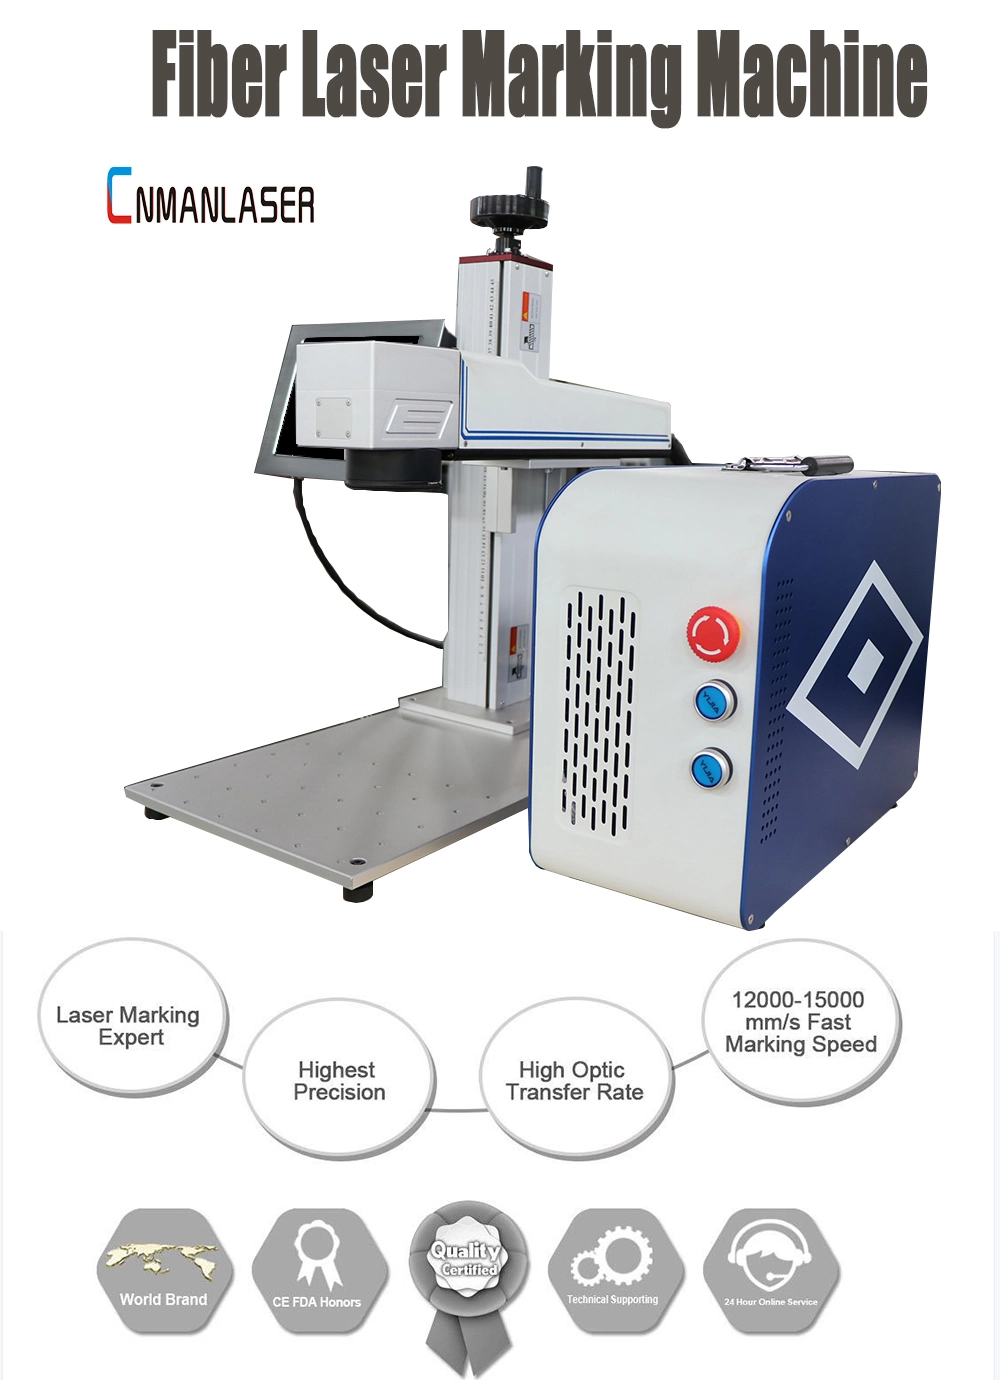 20W Fiber Laser Marking / Marker Equipemnt / Machine for Jewelry/Gold/Silver/Cutting Silver Gold Deep Engraving